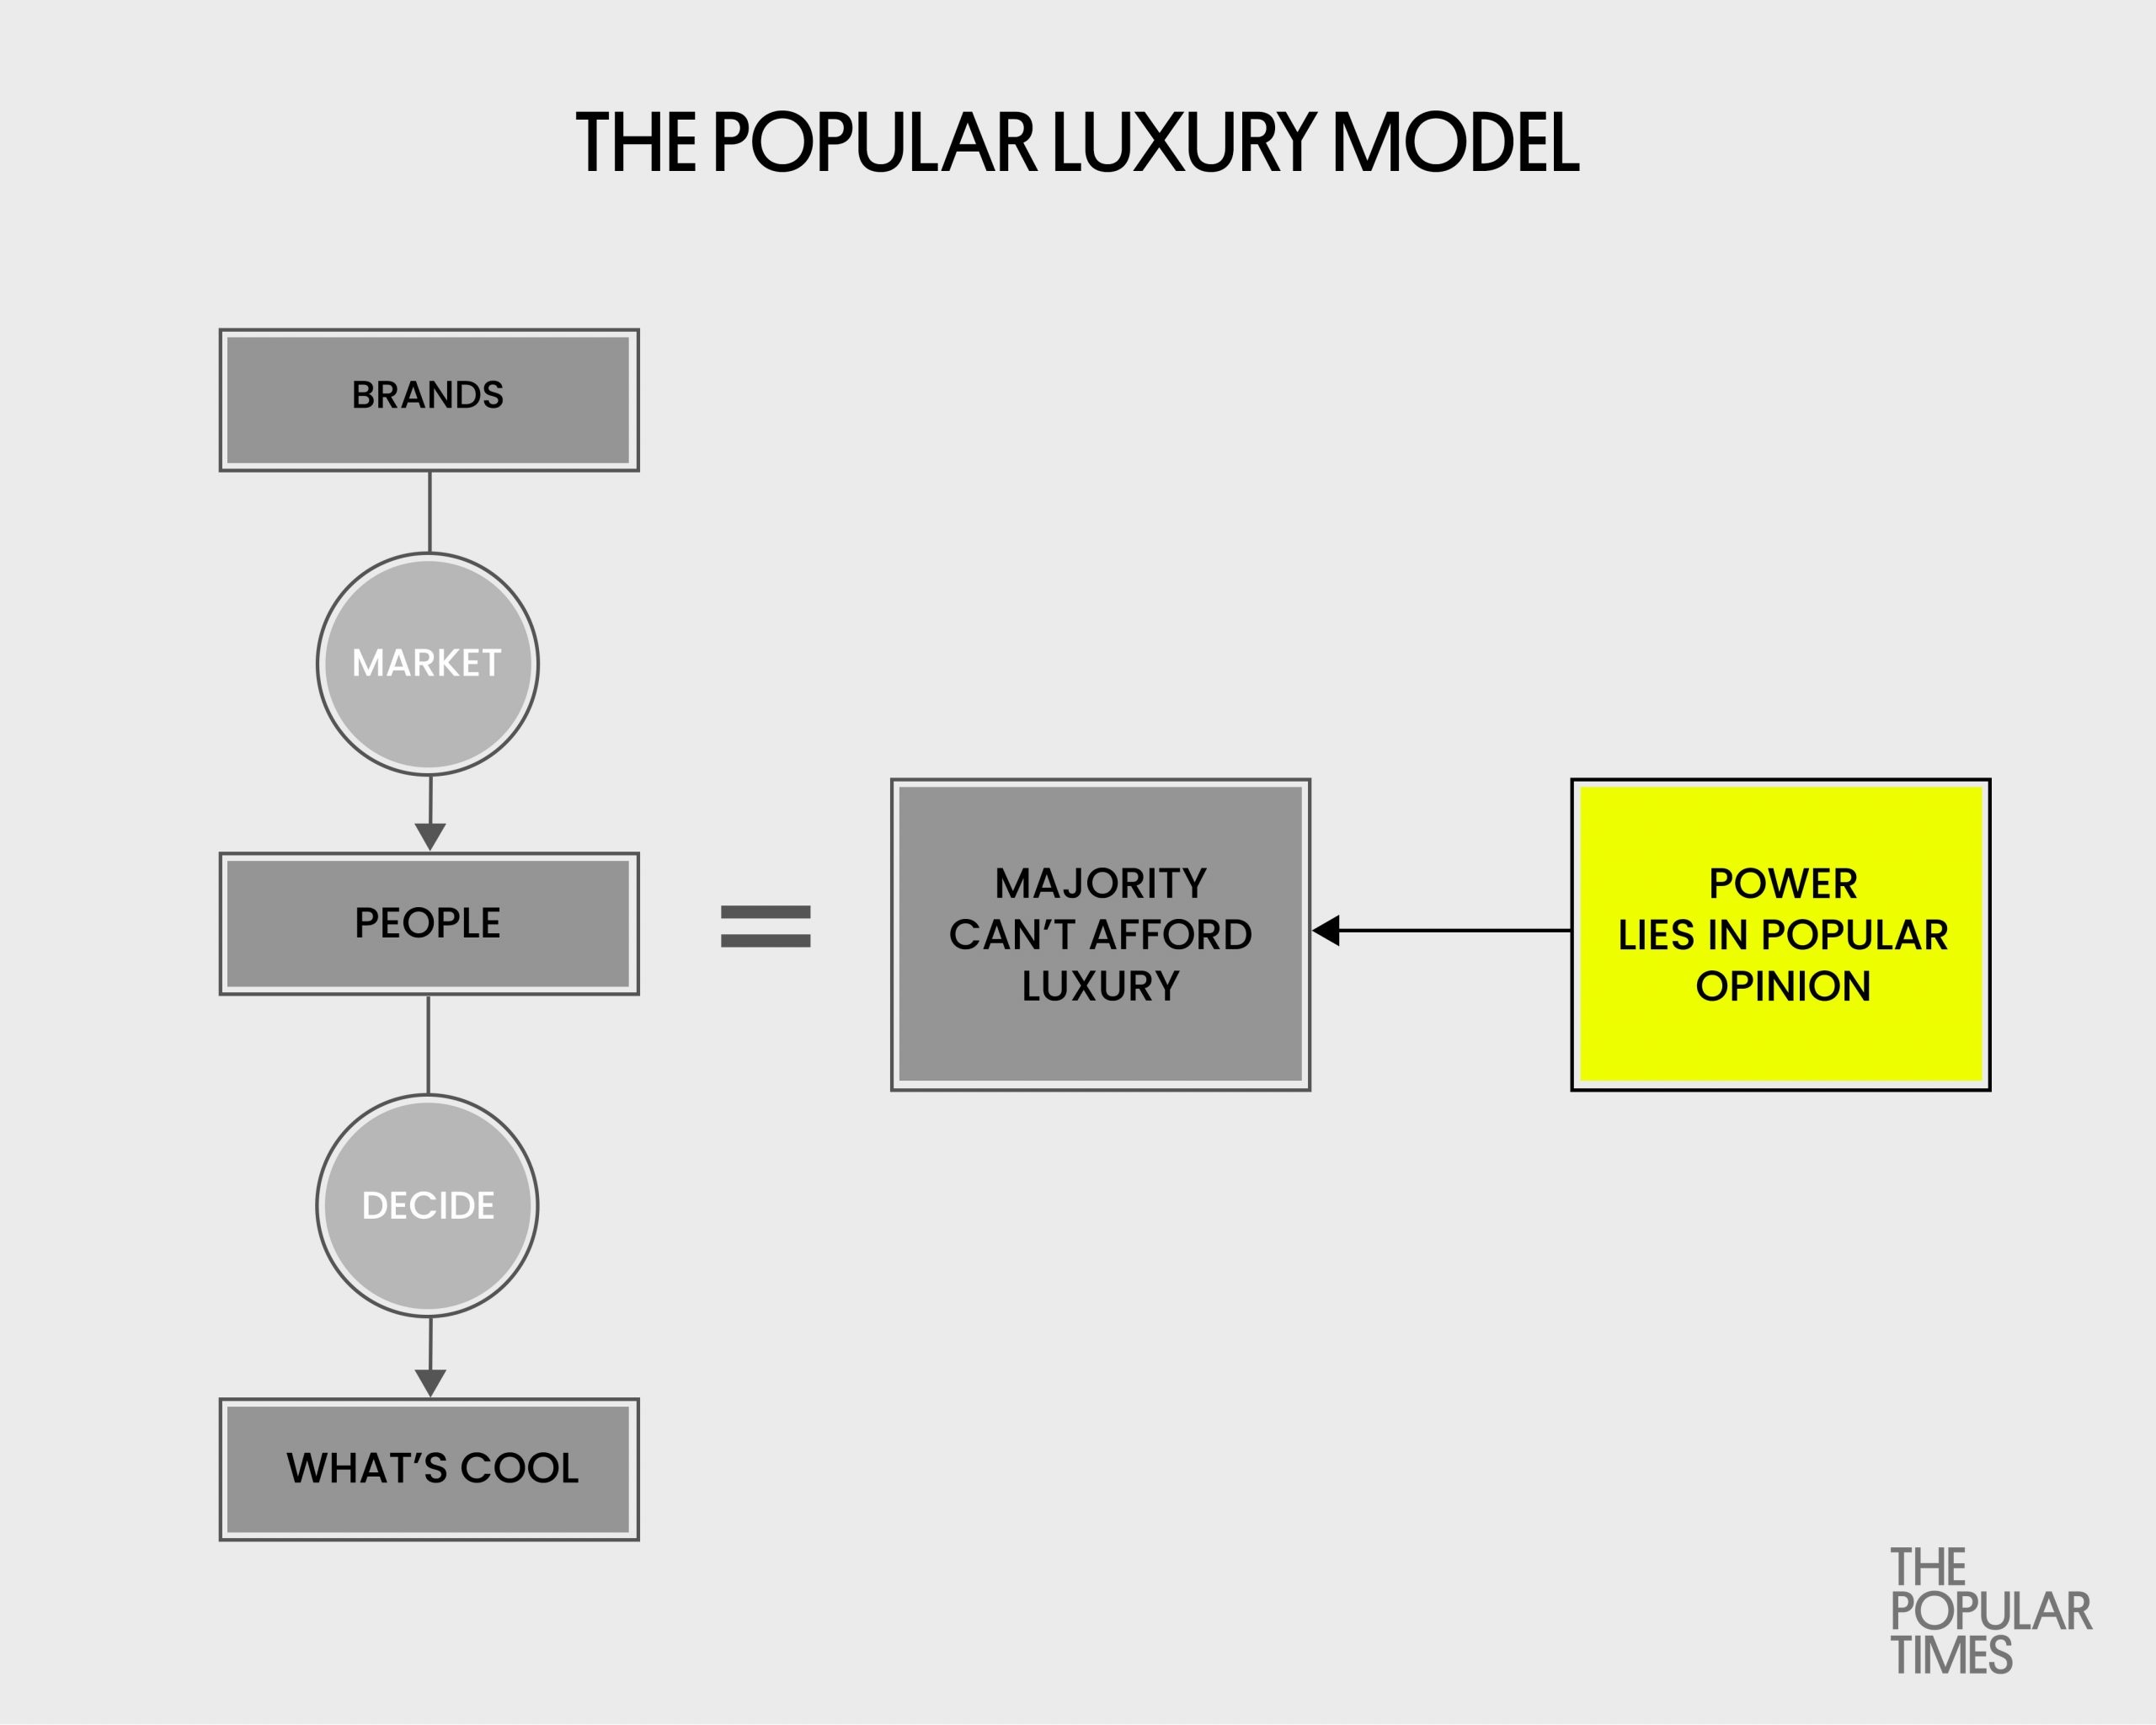 Popular Luxury (2020-): Establishes that luxury is for all people of the time. Born from and driven by Black, POC, and popular culture. Through digital channels, taste-making is dictated by popular opinion and all people, the majority of which cannot afford high price point luxury. Telfar’s brand represents popular luxury, which drives its power from a consensus driven by popular opinion – including a wide range of demographics and voices.